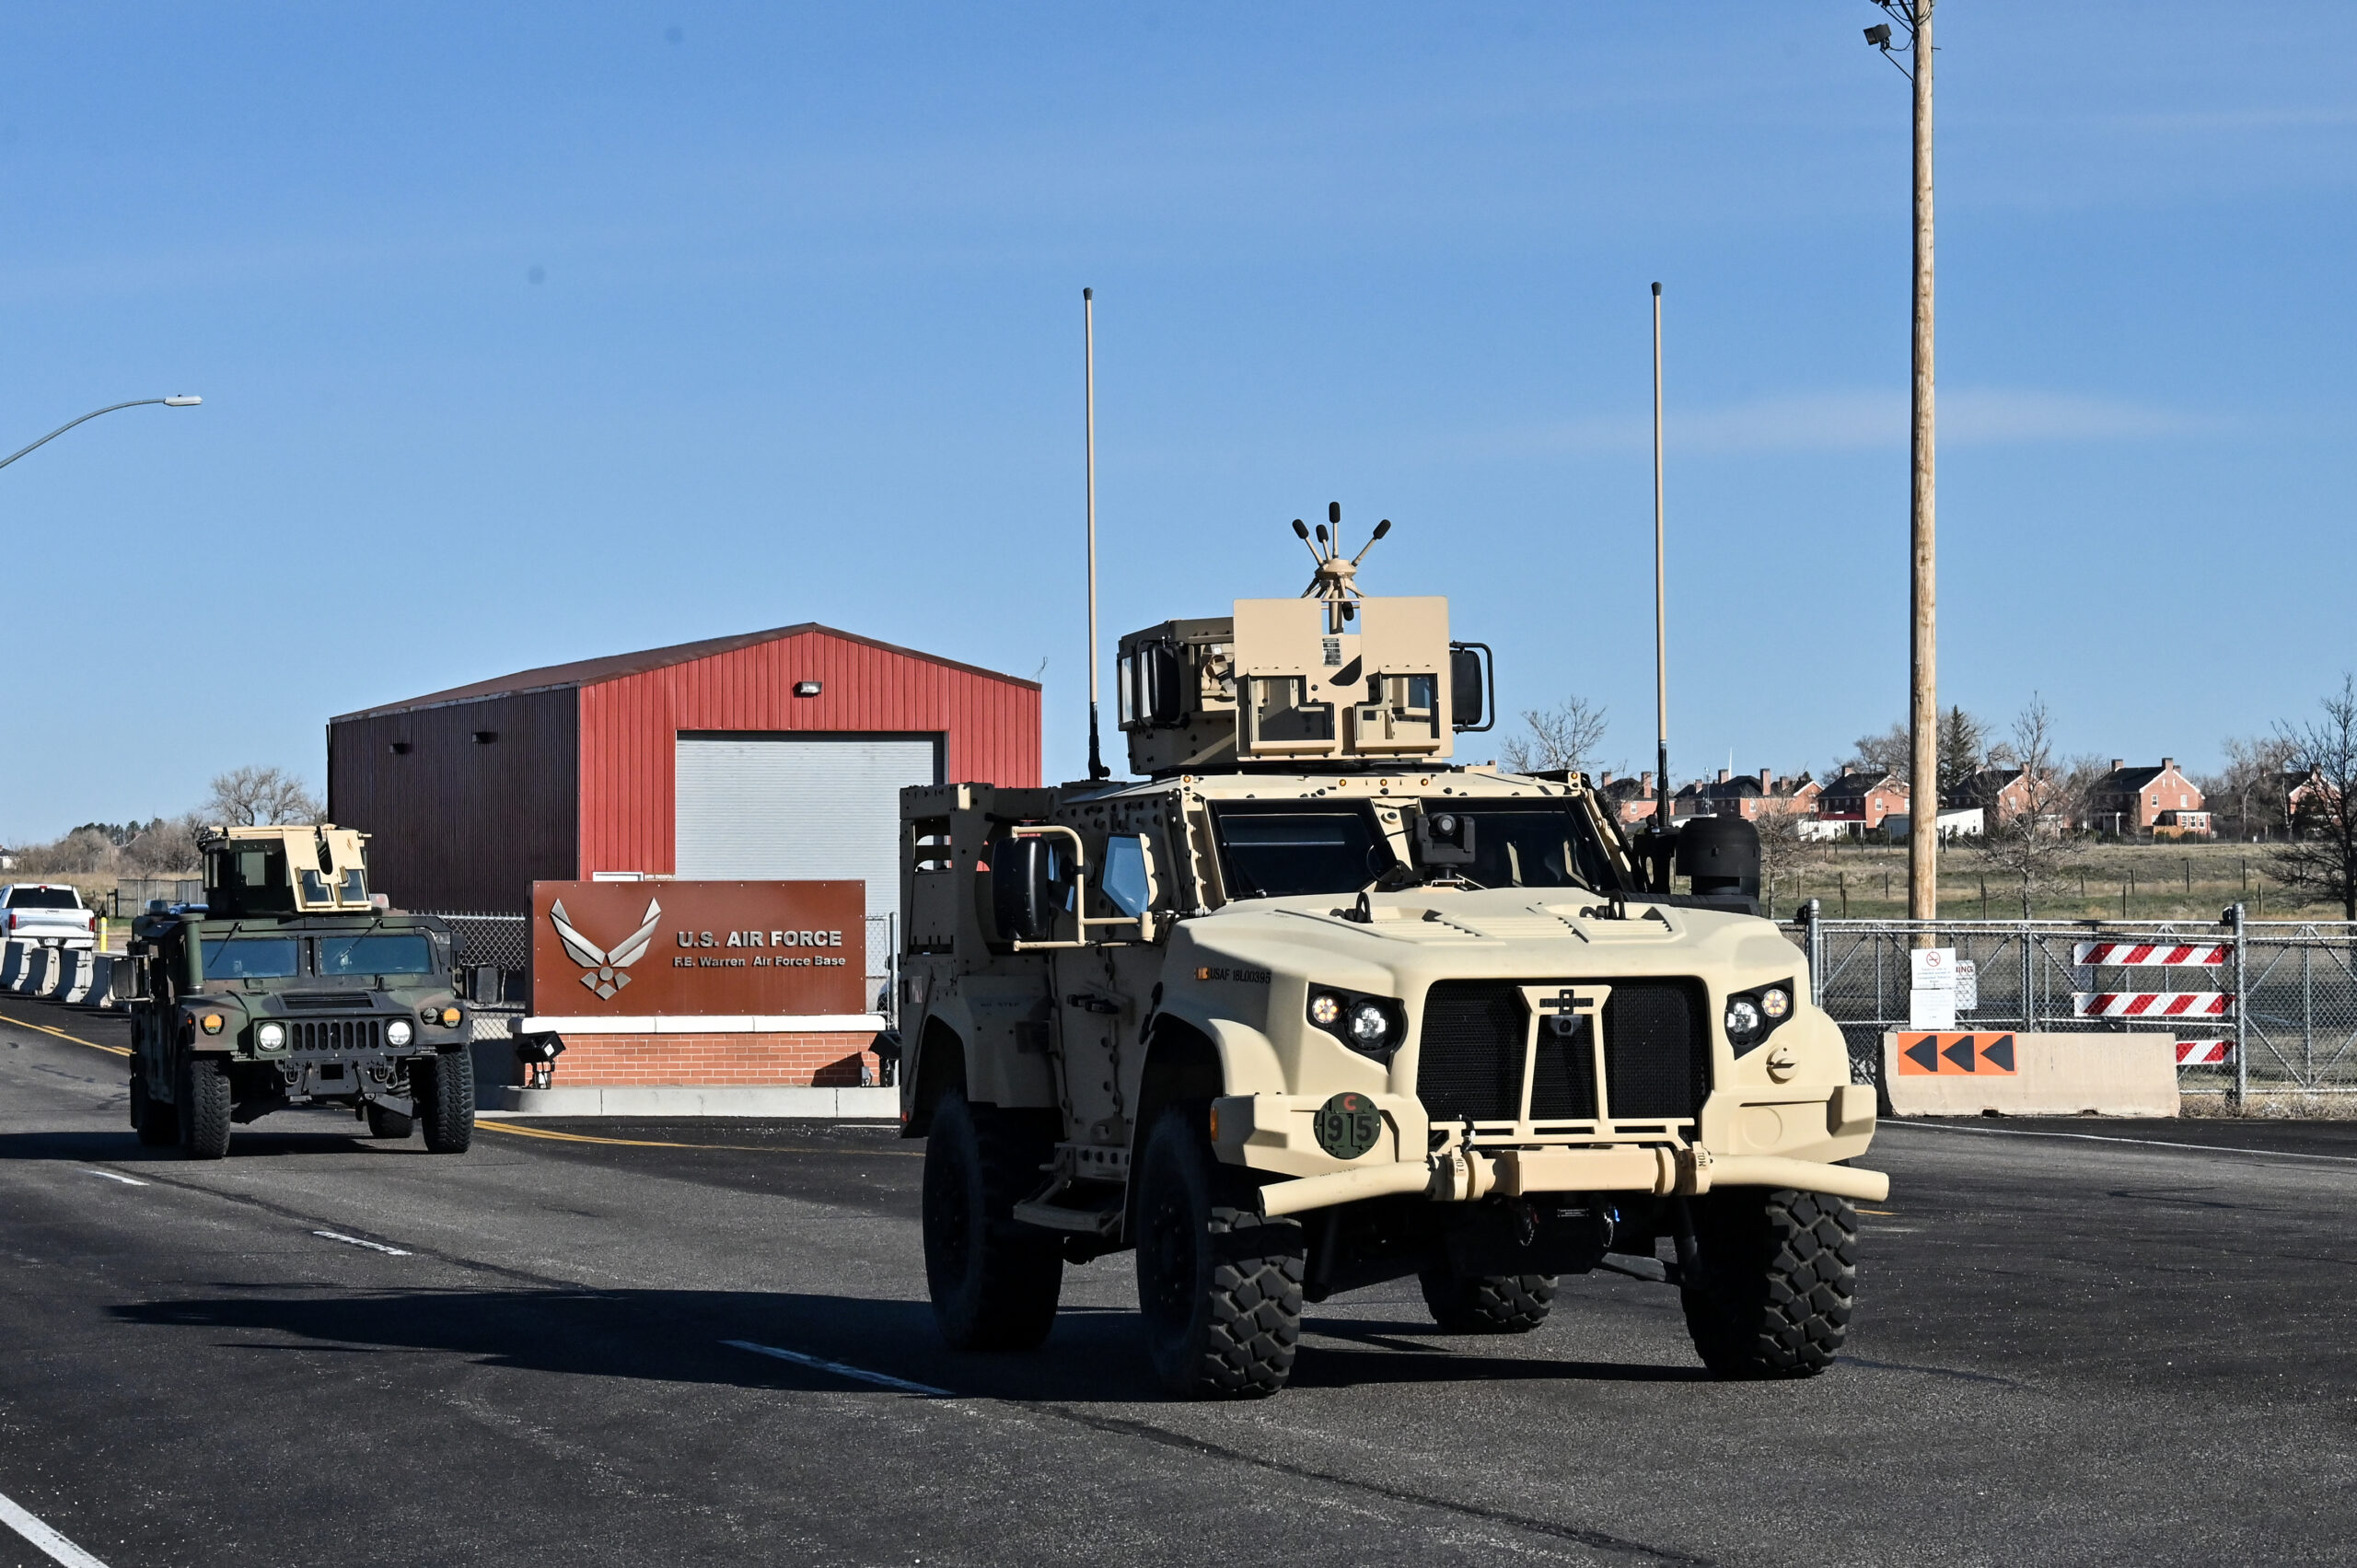 Airmen from the 90th Missile Security Forces Squadron depart F.E. Warren Air Force Base, Wyoming, for the first operational Joint Light Tactical Vehicle mission supporting maintenance at a launch facility near Harrisburg, Nebraska, April 24, 2023. This is the first step in modernizing the security forces vehicle fleet to provide more lethality and security for the nuclear enterprise. (Air Force photo by Joseph Coslett Jr.)